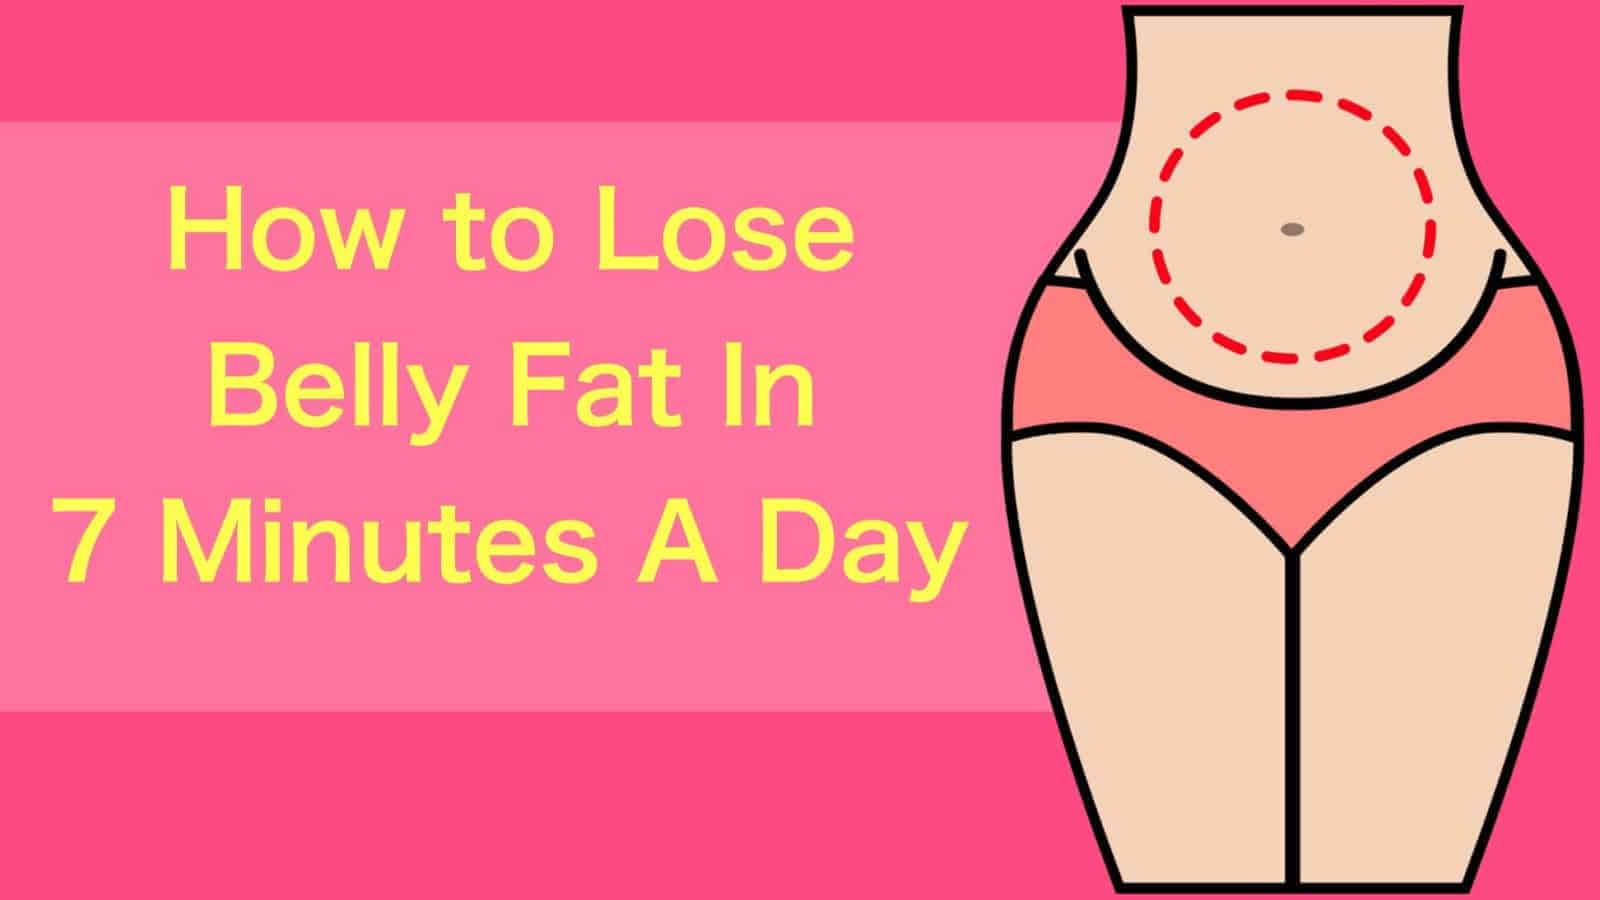 How to Lose Belly Fat In 7 Minutes A Day